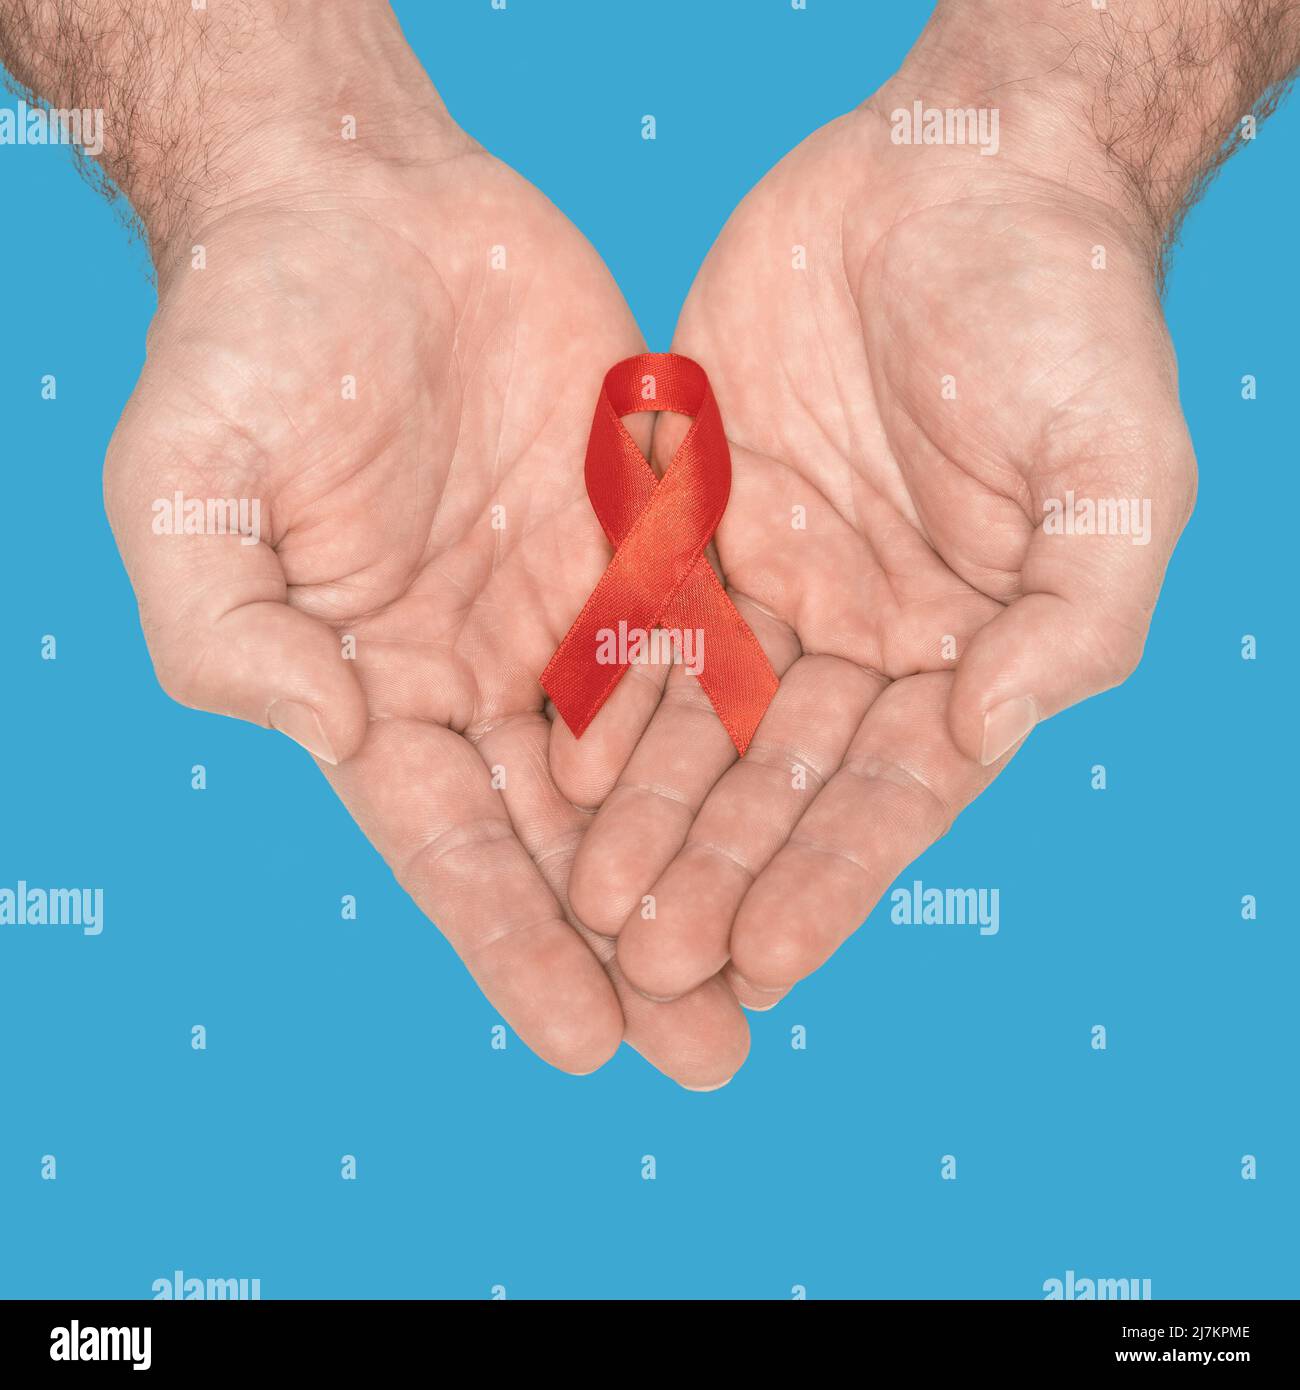 Red awareness ribbon bow on mans helping hands isolated on blue background. HIV, AIDS world day. Social life issues concept. Aids charity fund concept. Healthcare and medicine concept.  Stock Photo